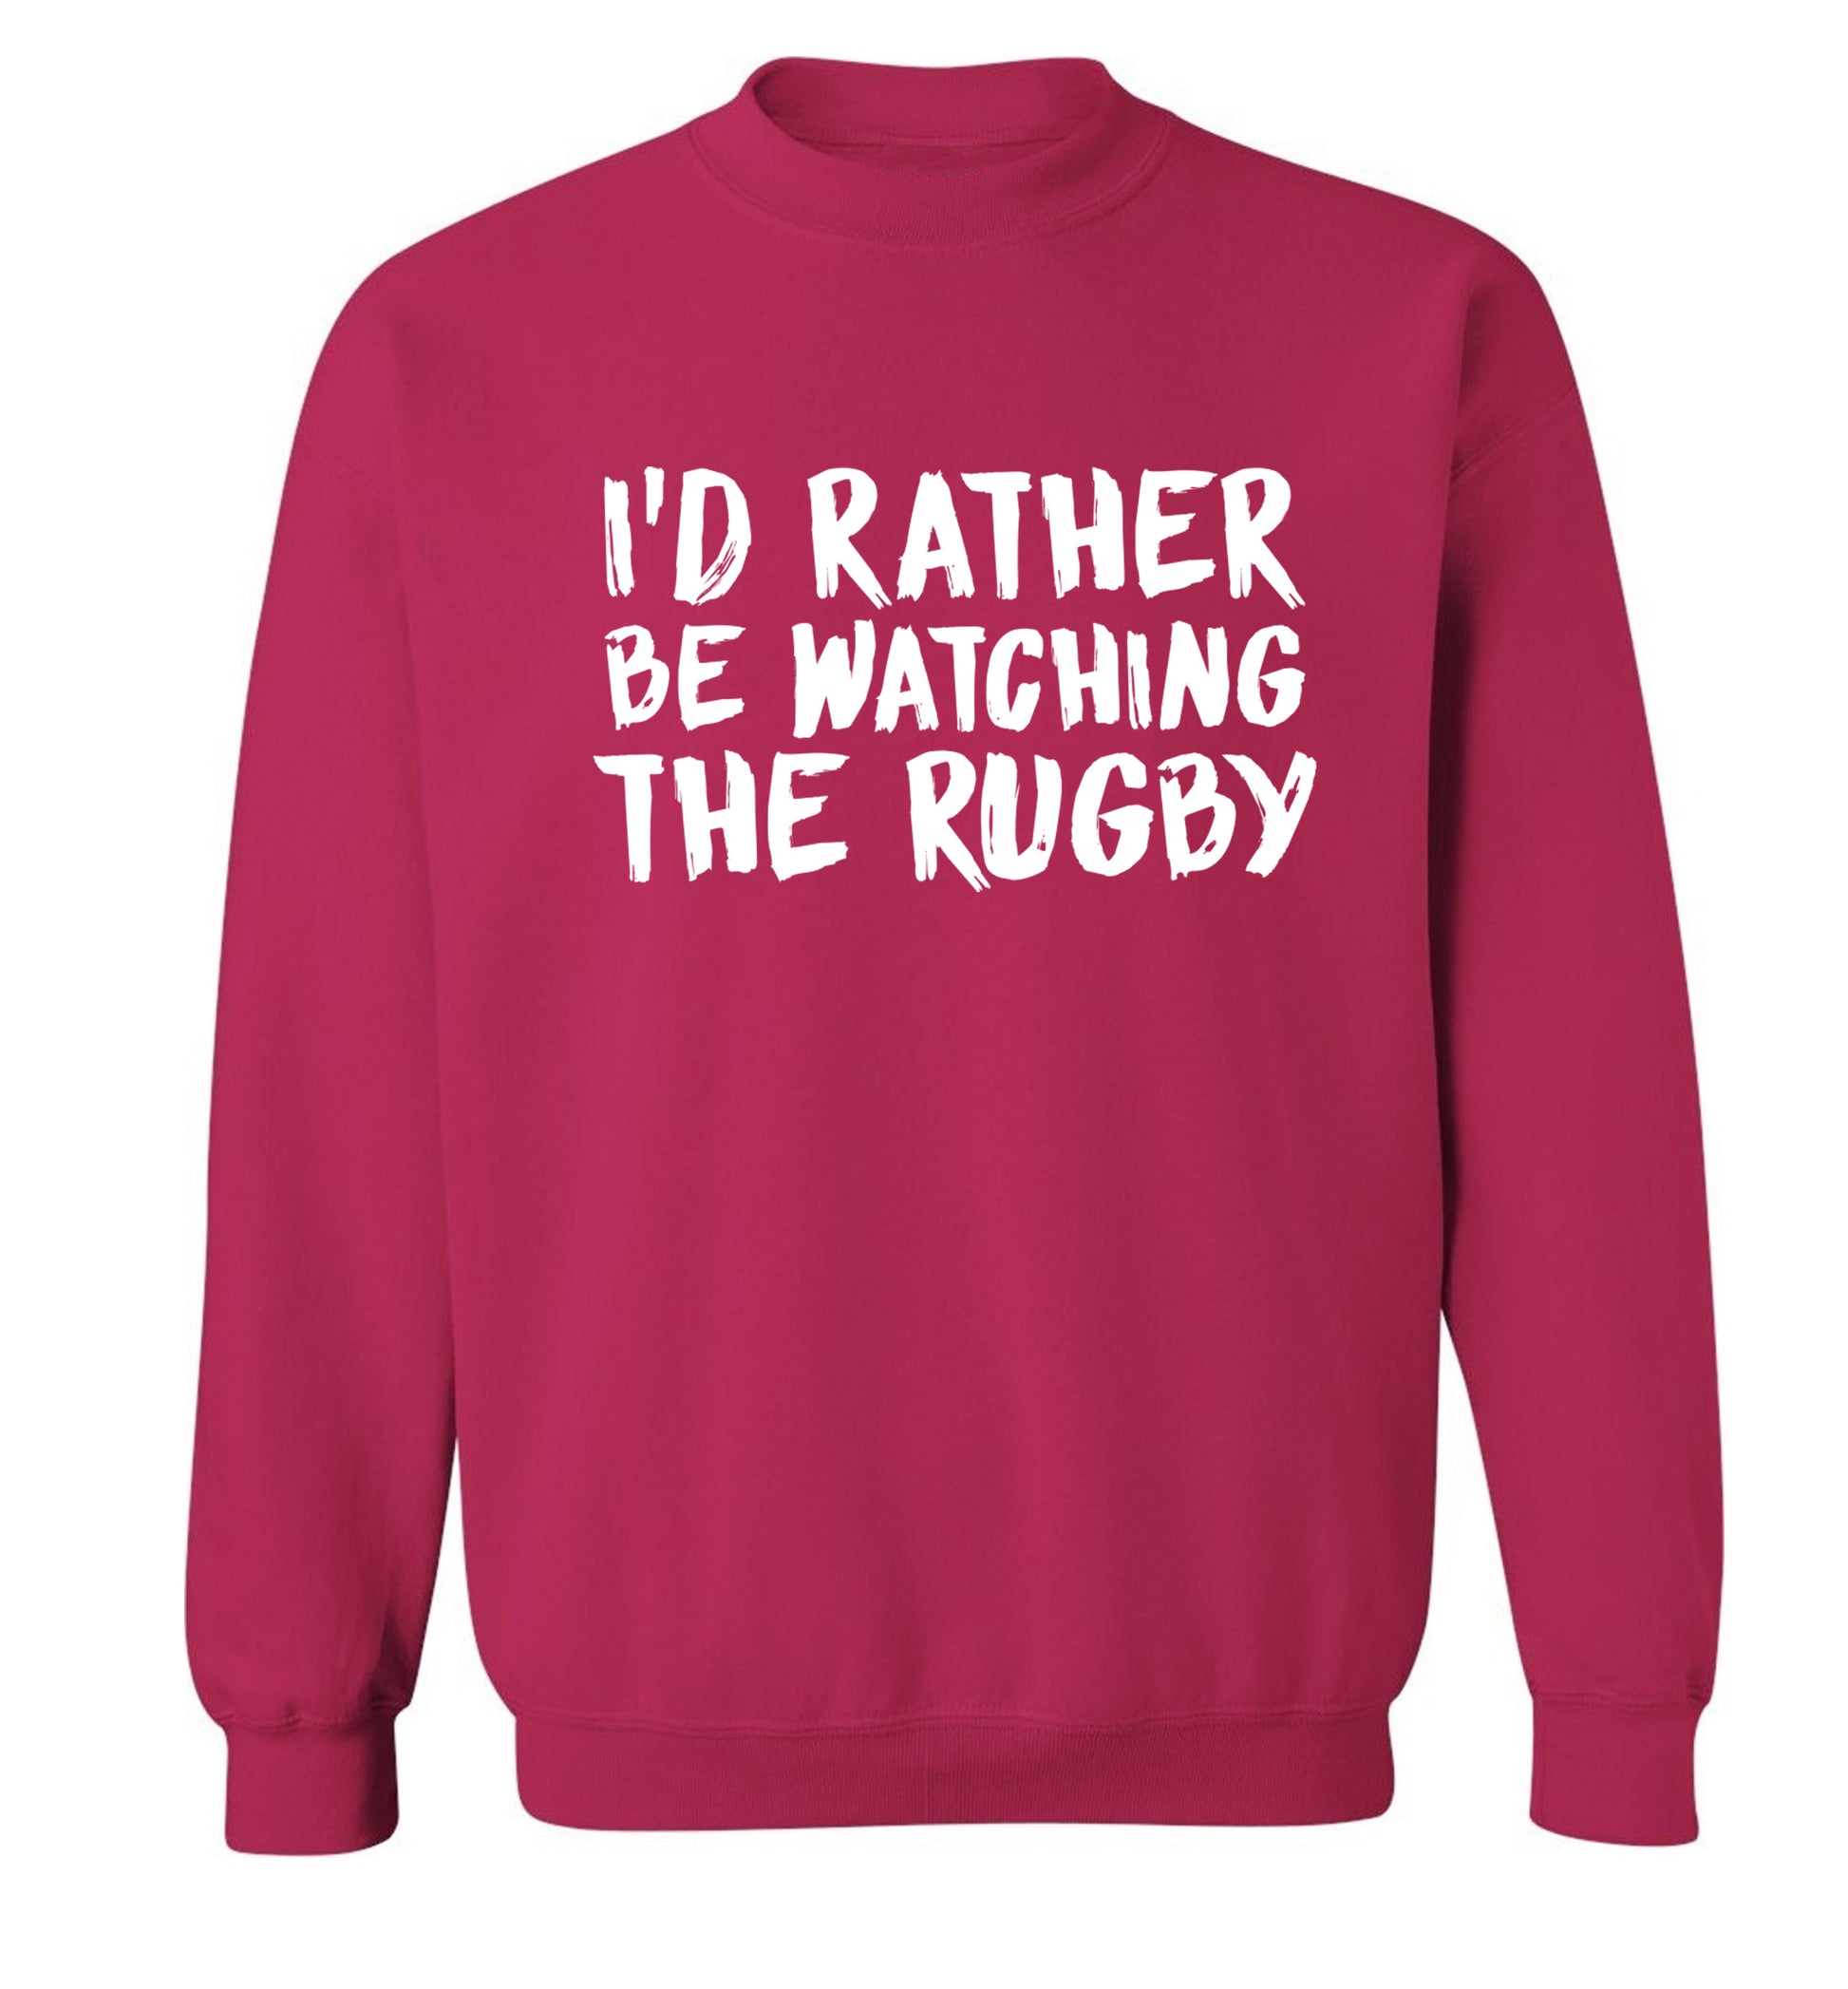 I'd rather be watching the rugby Adult's unisex pink Sweater 2XL